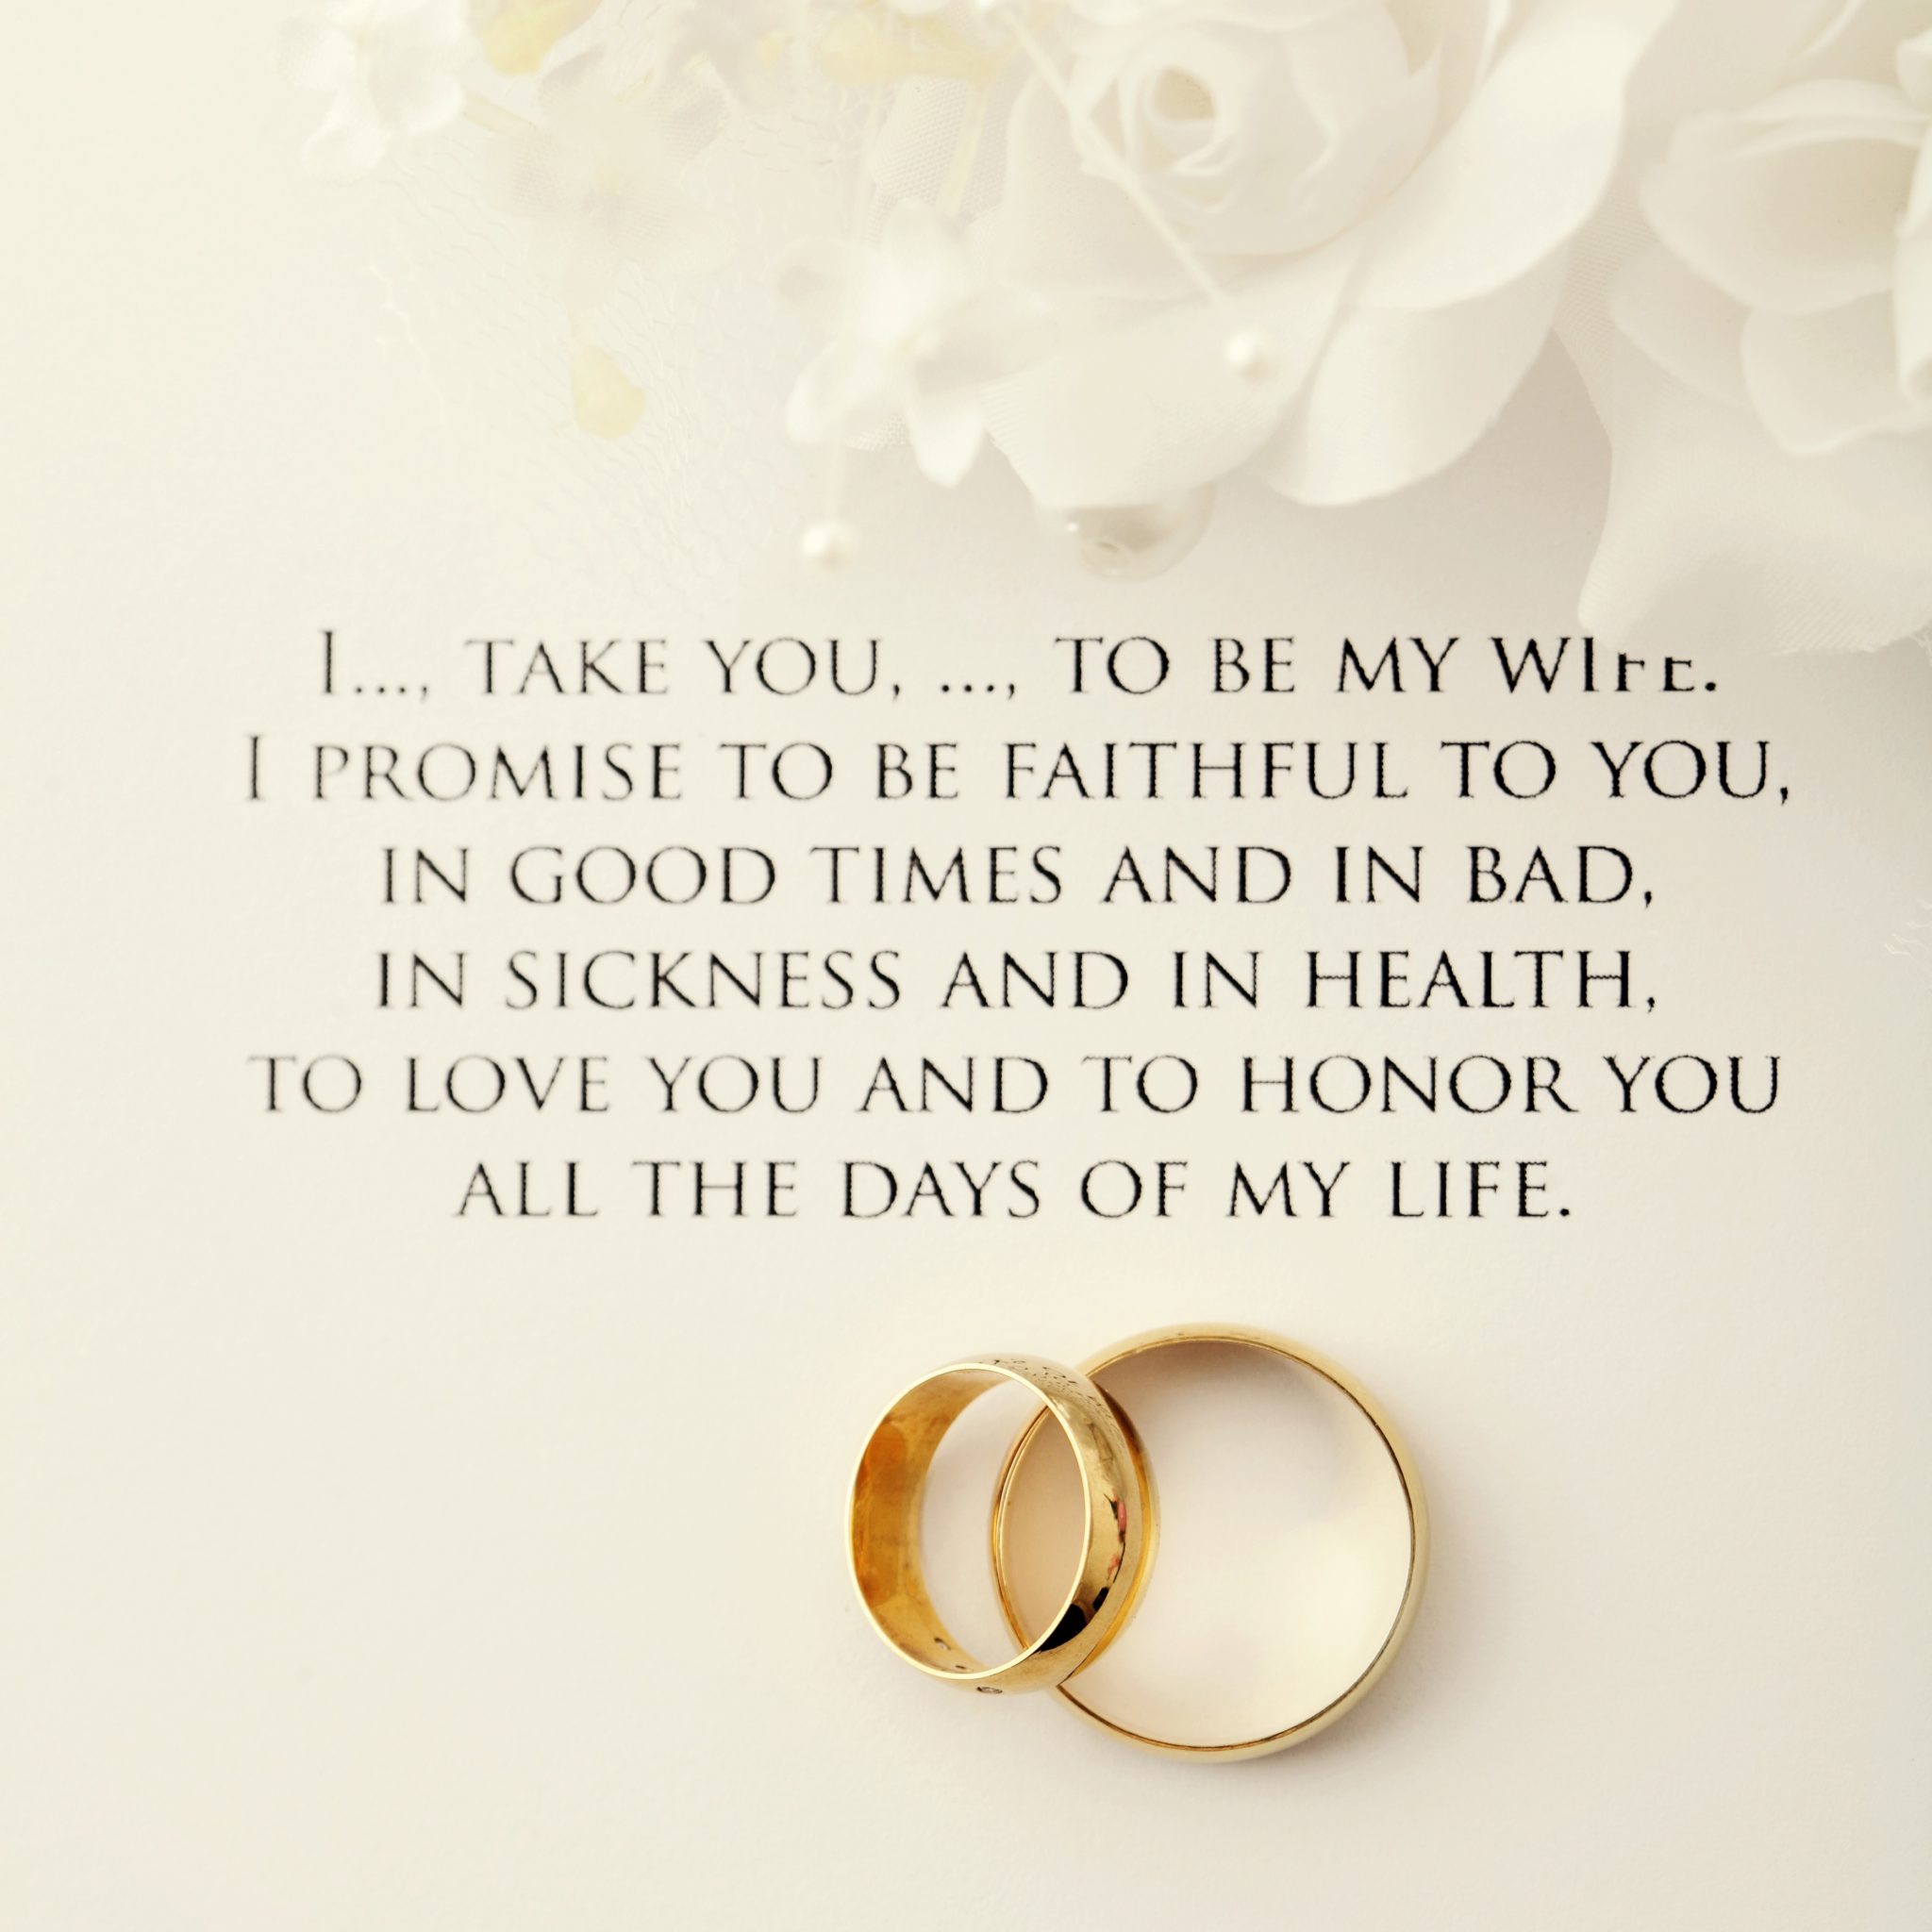 In our wedding vows most of us promise to "love honor and cherish&...